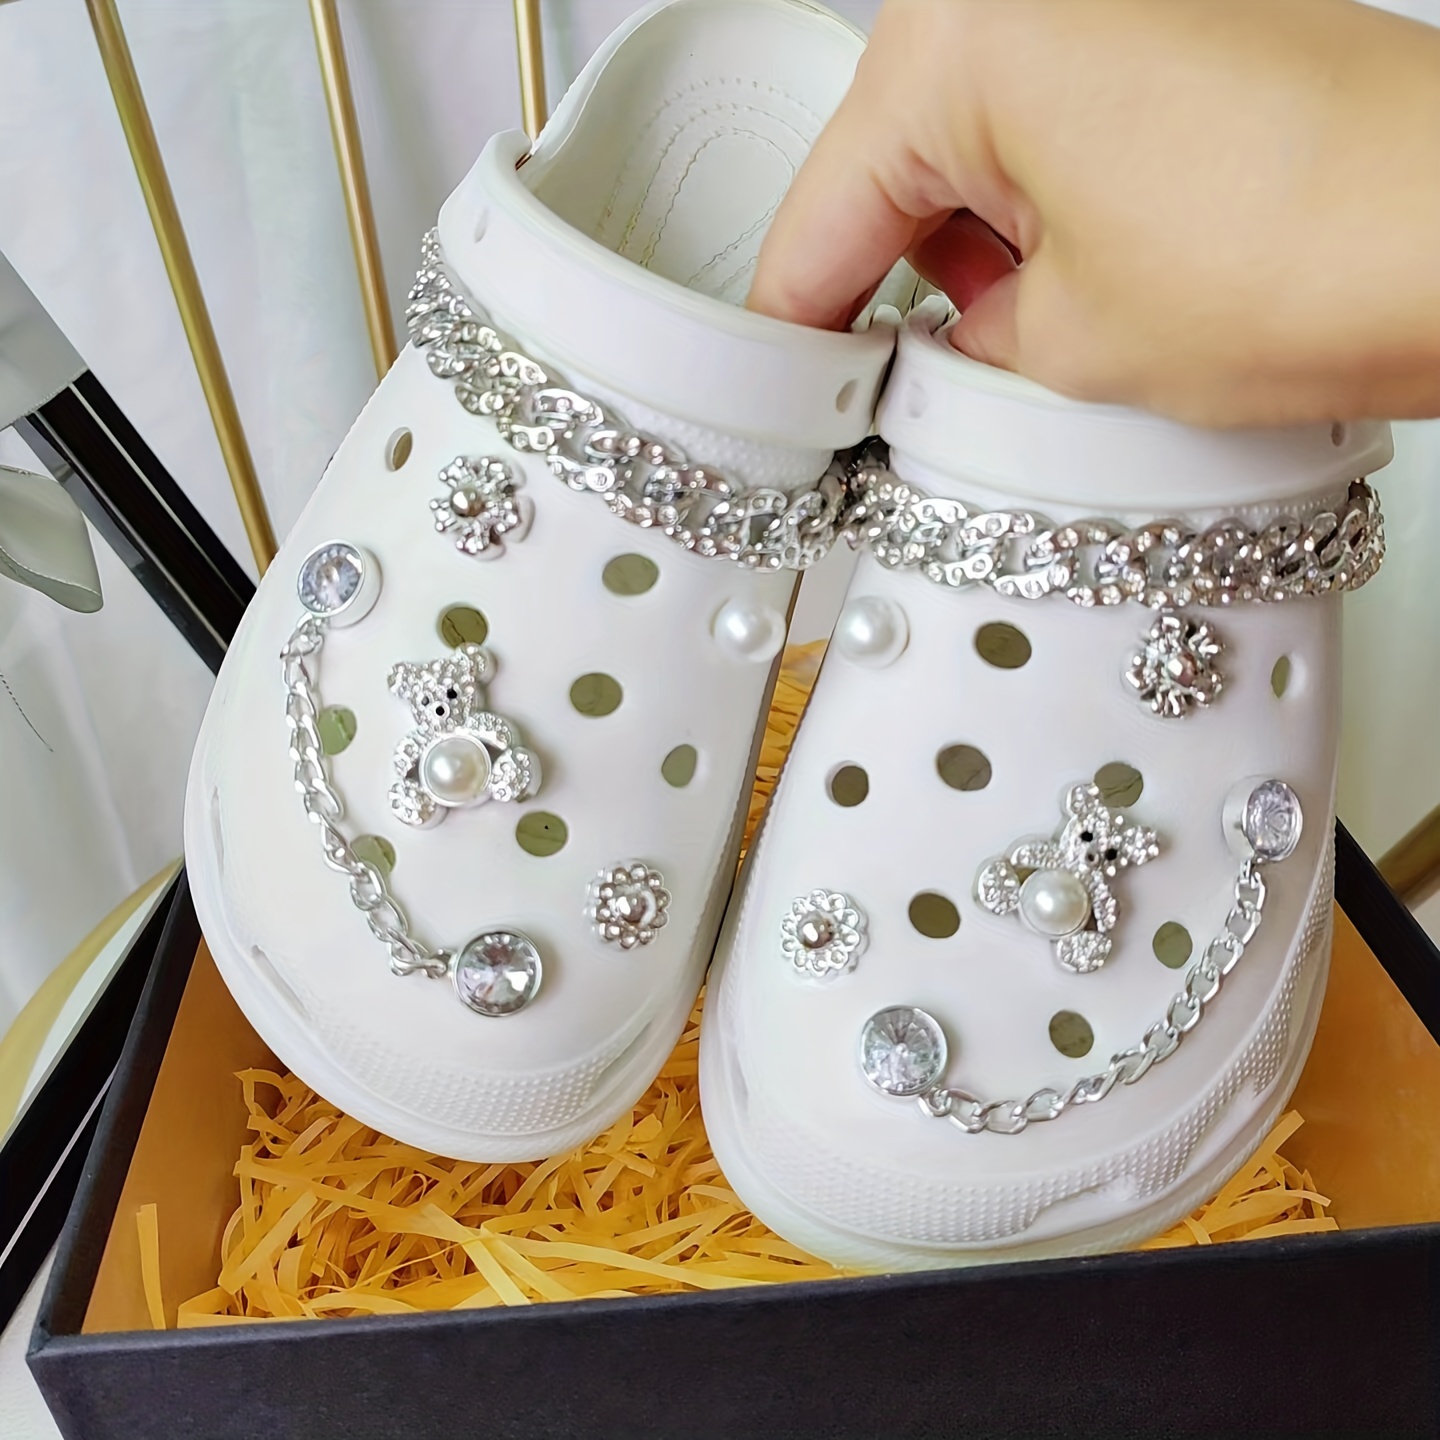 Women's Hole Shoes Accessories Silver Bear Rhinestone Chain And Cute Trinkets, Can Be Used As Gifts, Party Decorations, Hole Slippers Sandals Decoration Accessories -